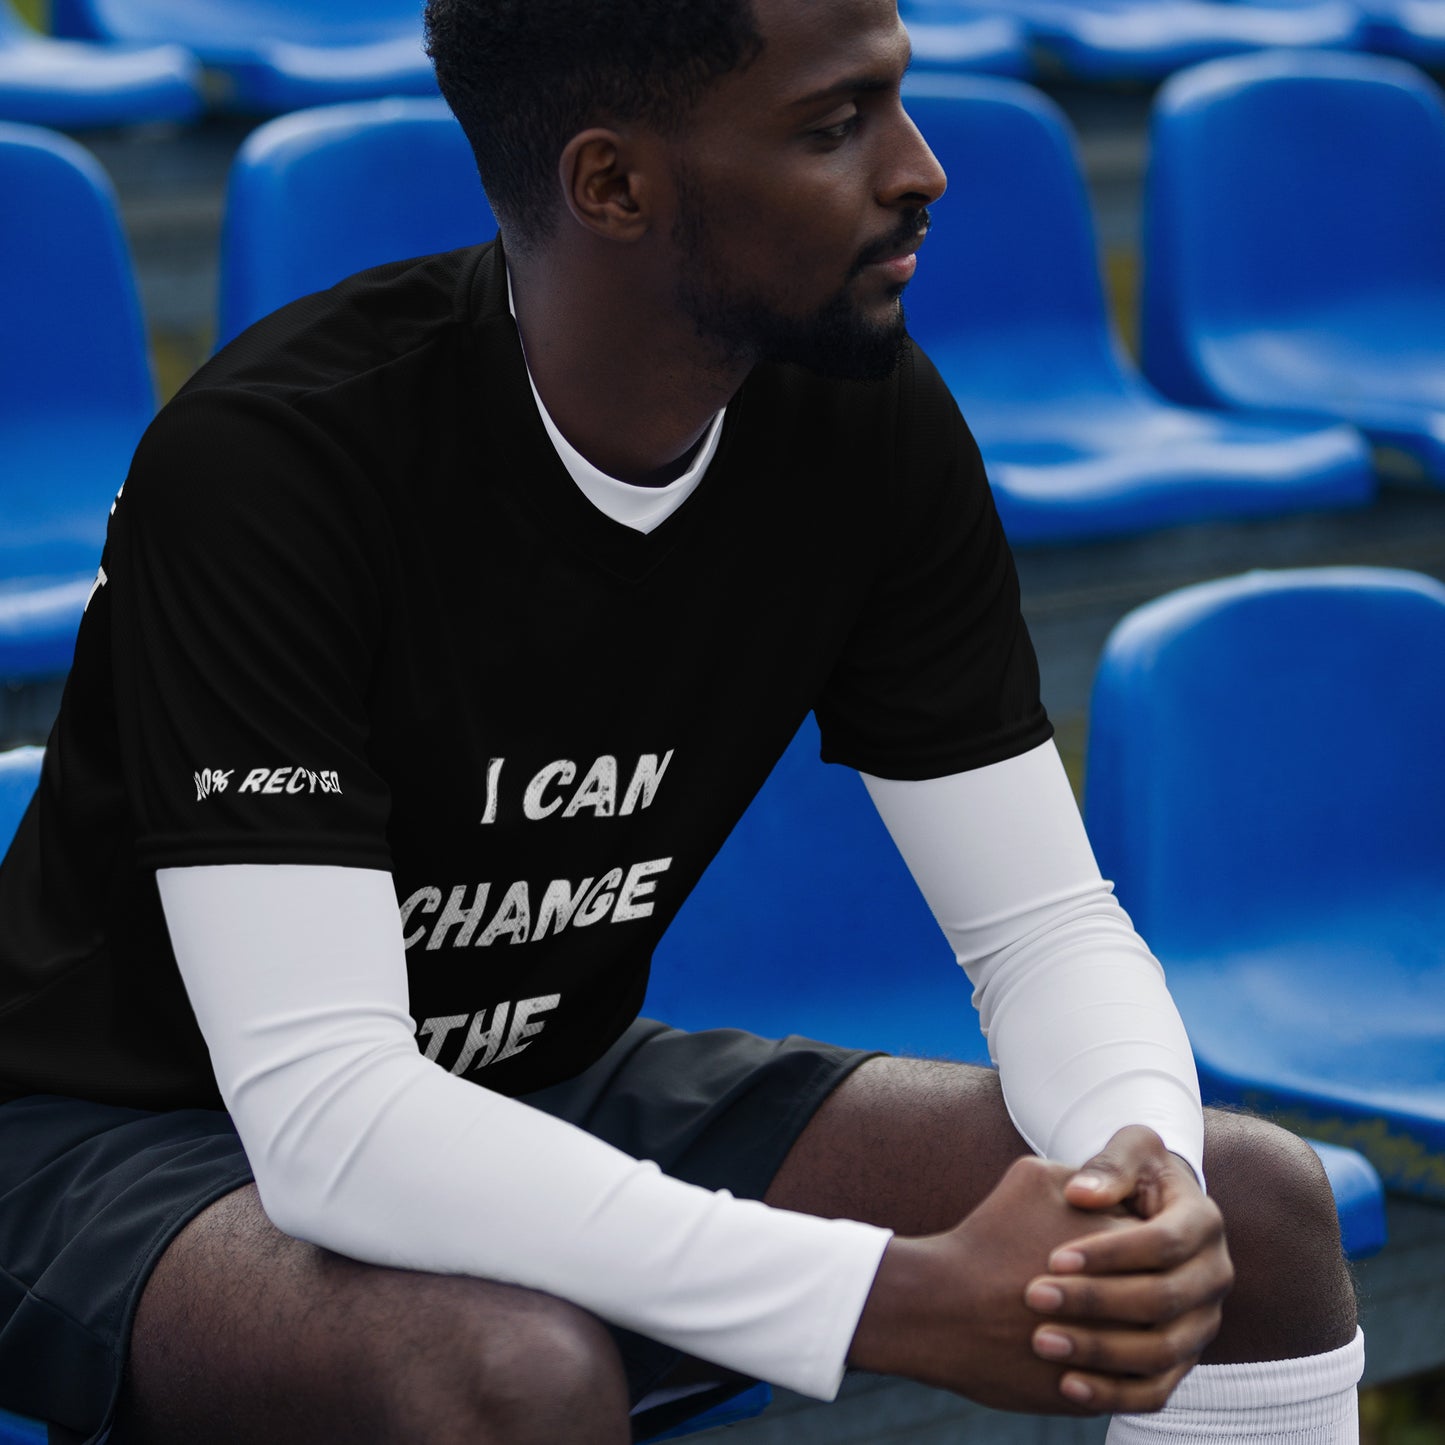 I Can Change The World - Pitch Black Recycled Unisex Sports Jersey